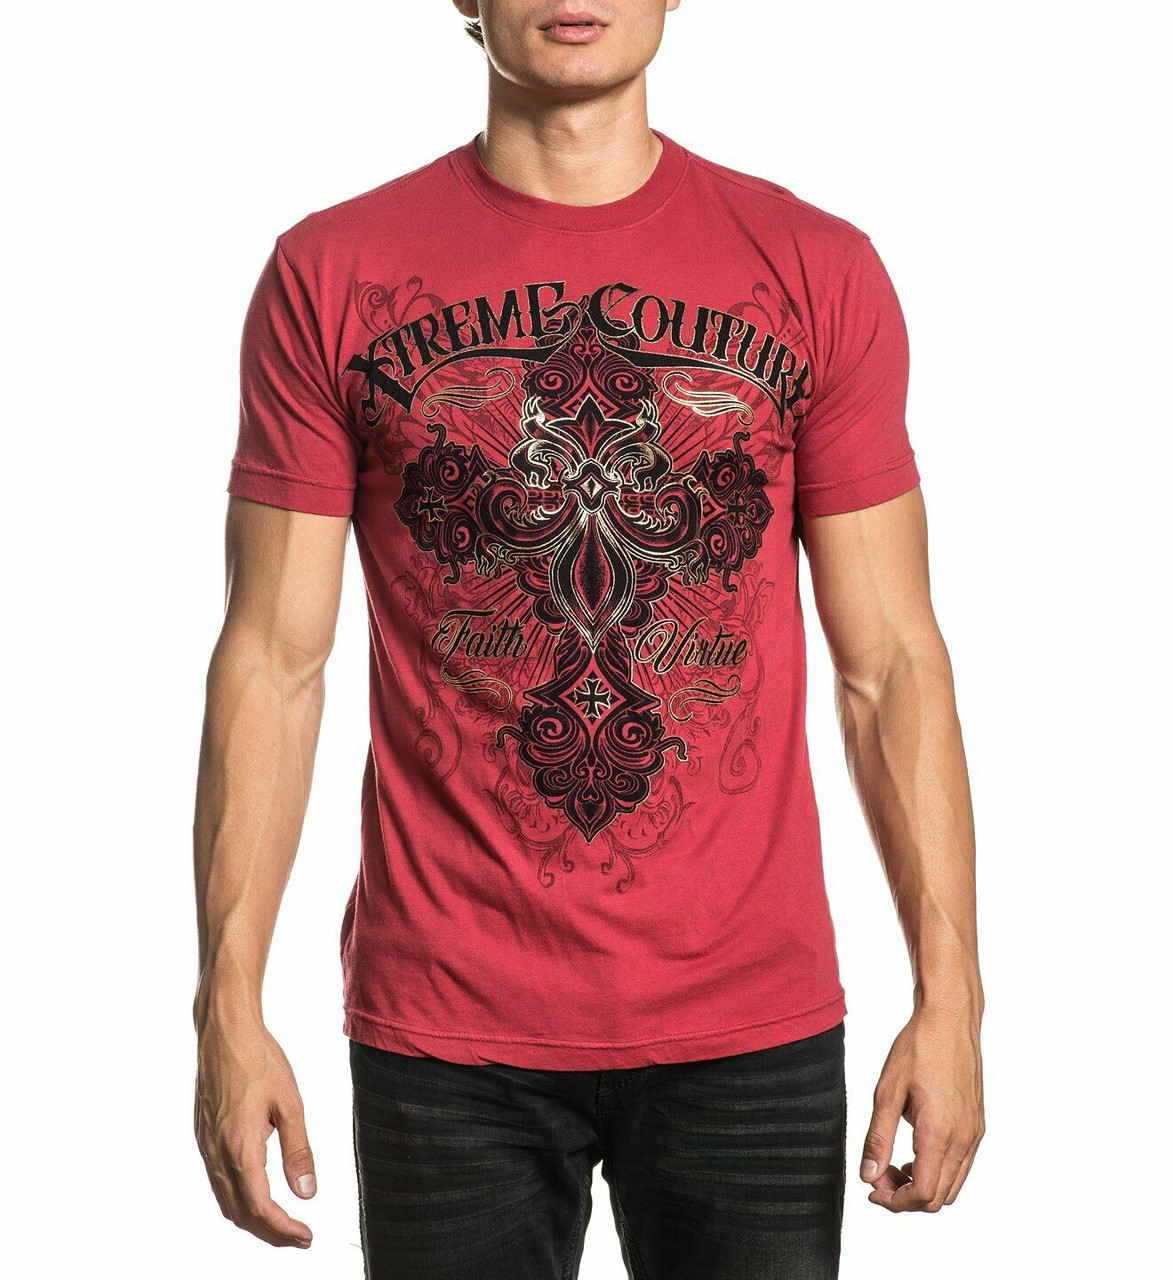 Xtreme Couture by Affliction Insignia UFC MMA Biker Tattoos Cross 